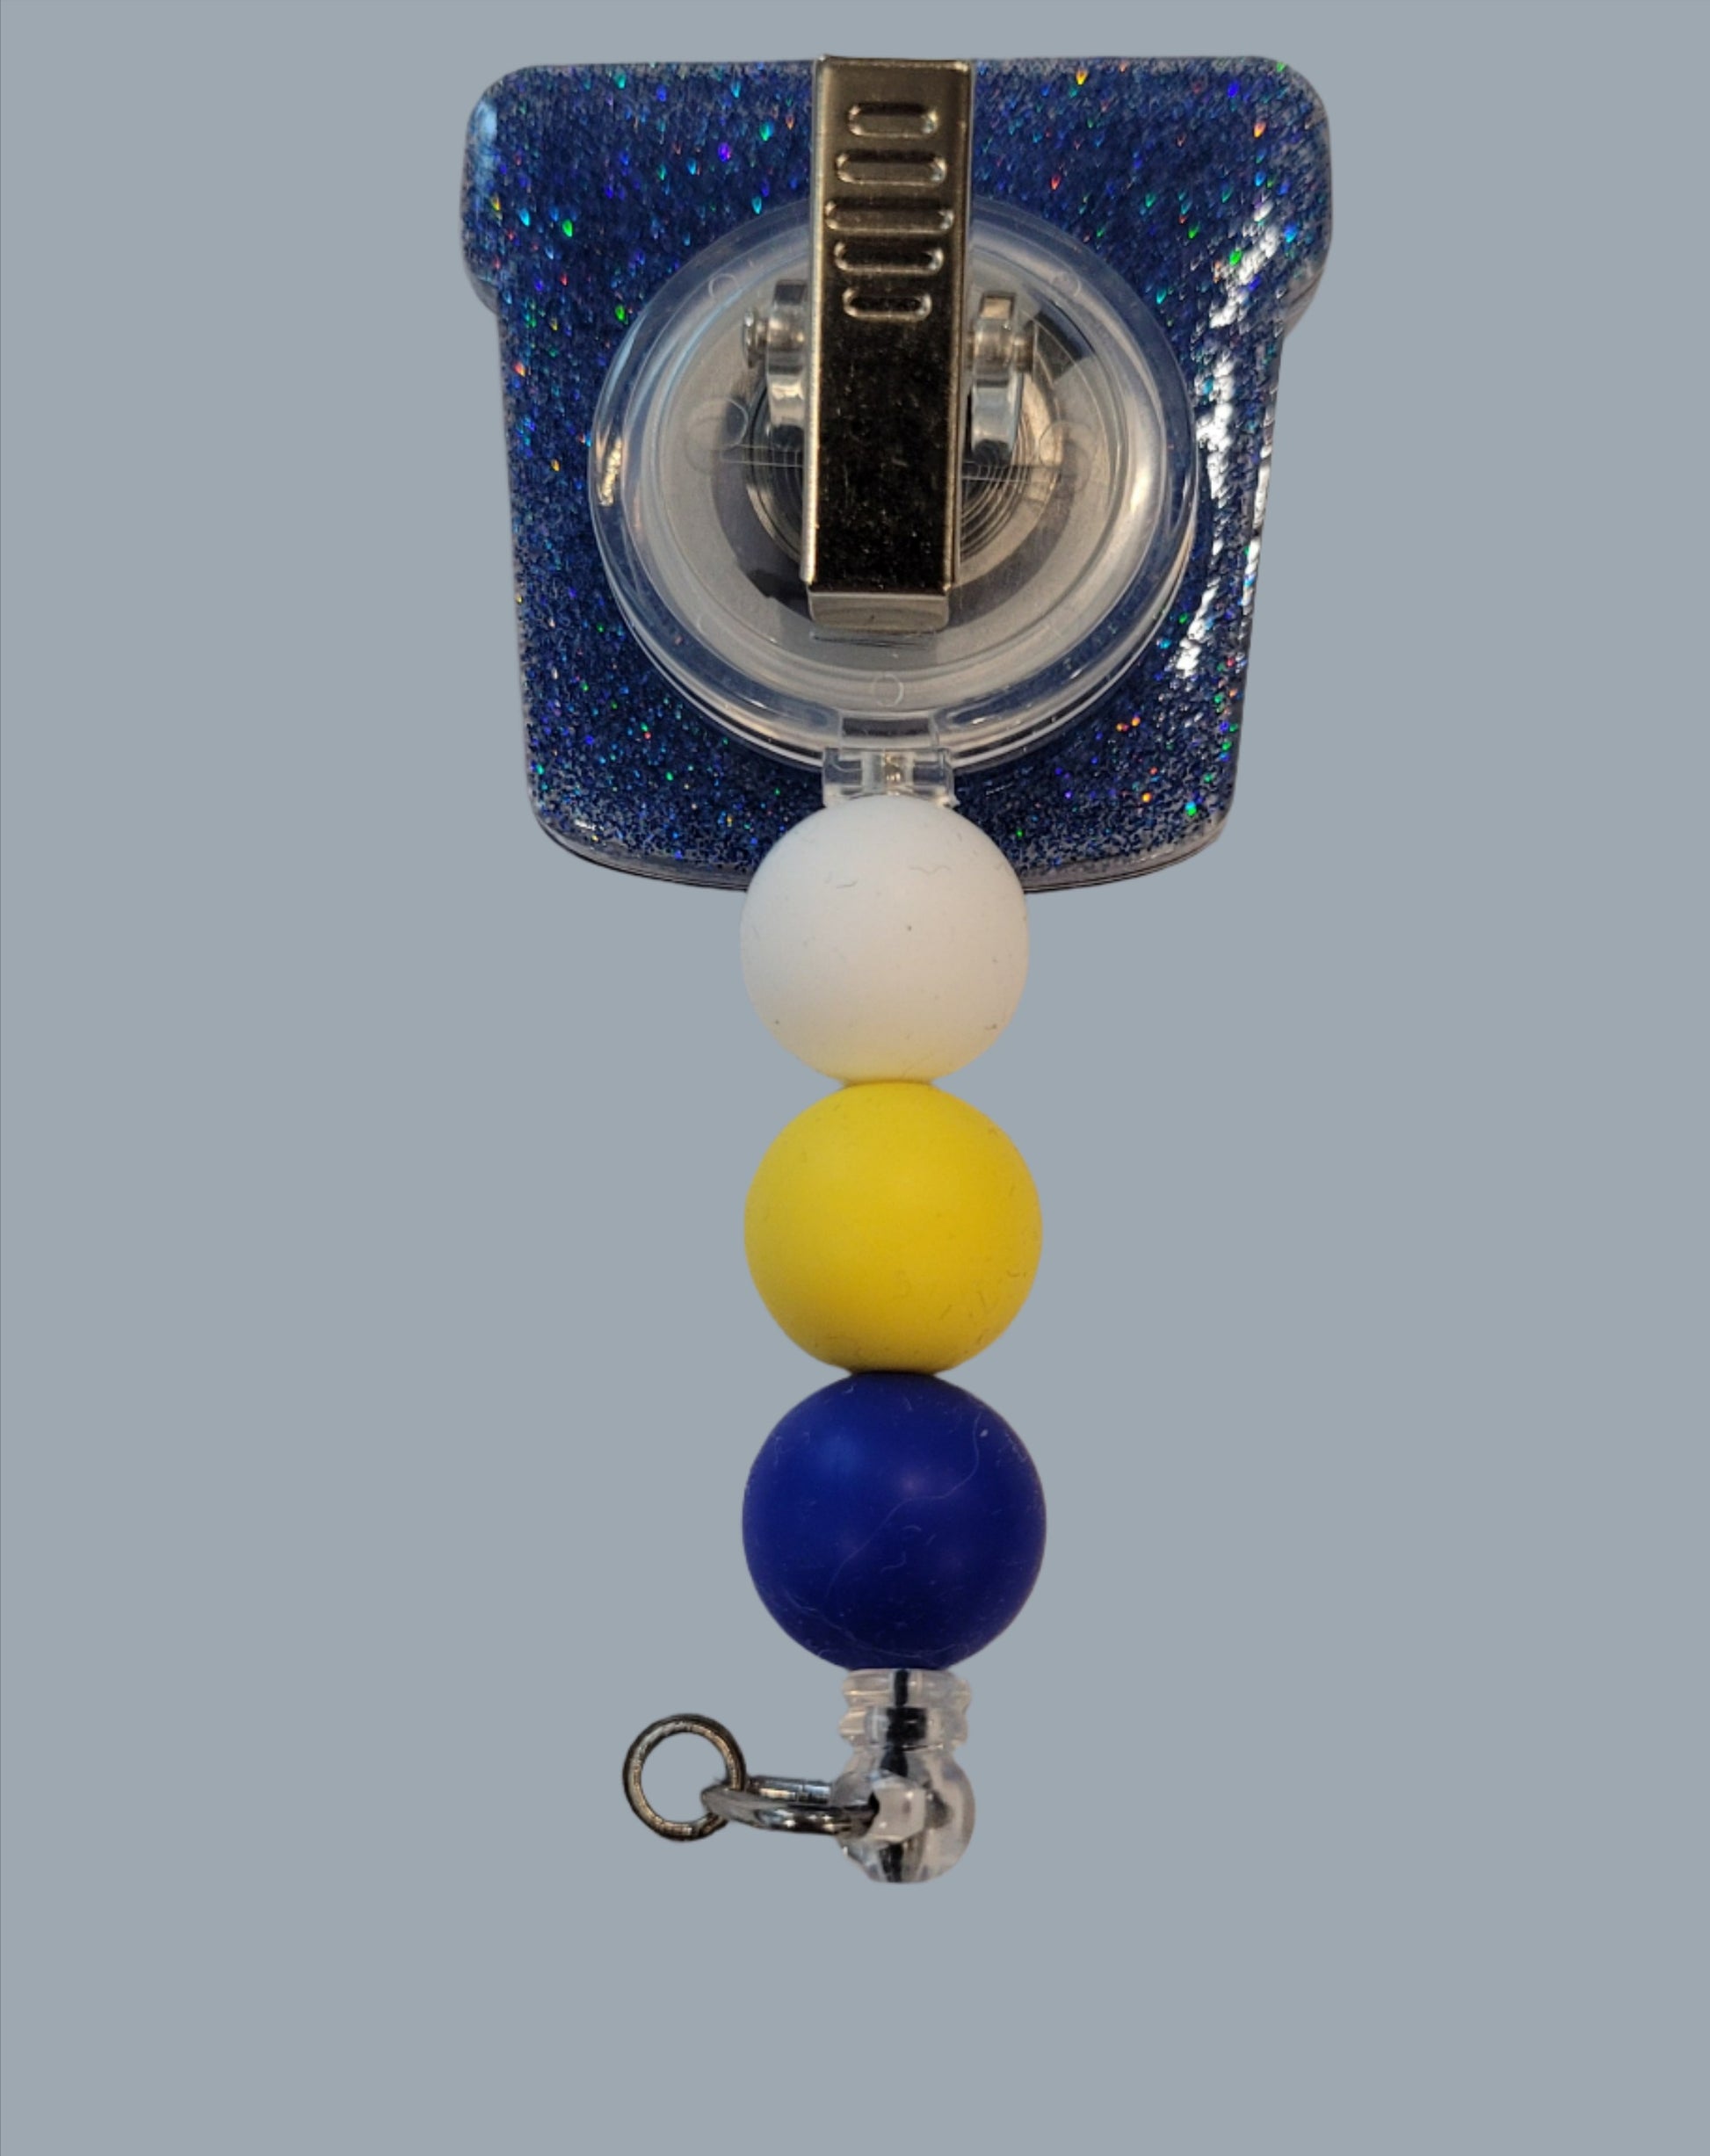 Part of our latest collection of Medical Badge Reels available now, we will need this filled for the Stool Sample Badge Reel. Featuring a stool and a light blue glitter base adorned with coordinating beads, this Badge Reel is sure to catch....well we will leave that alone.